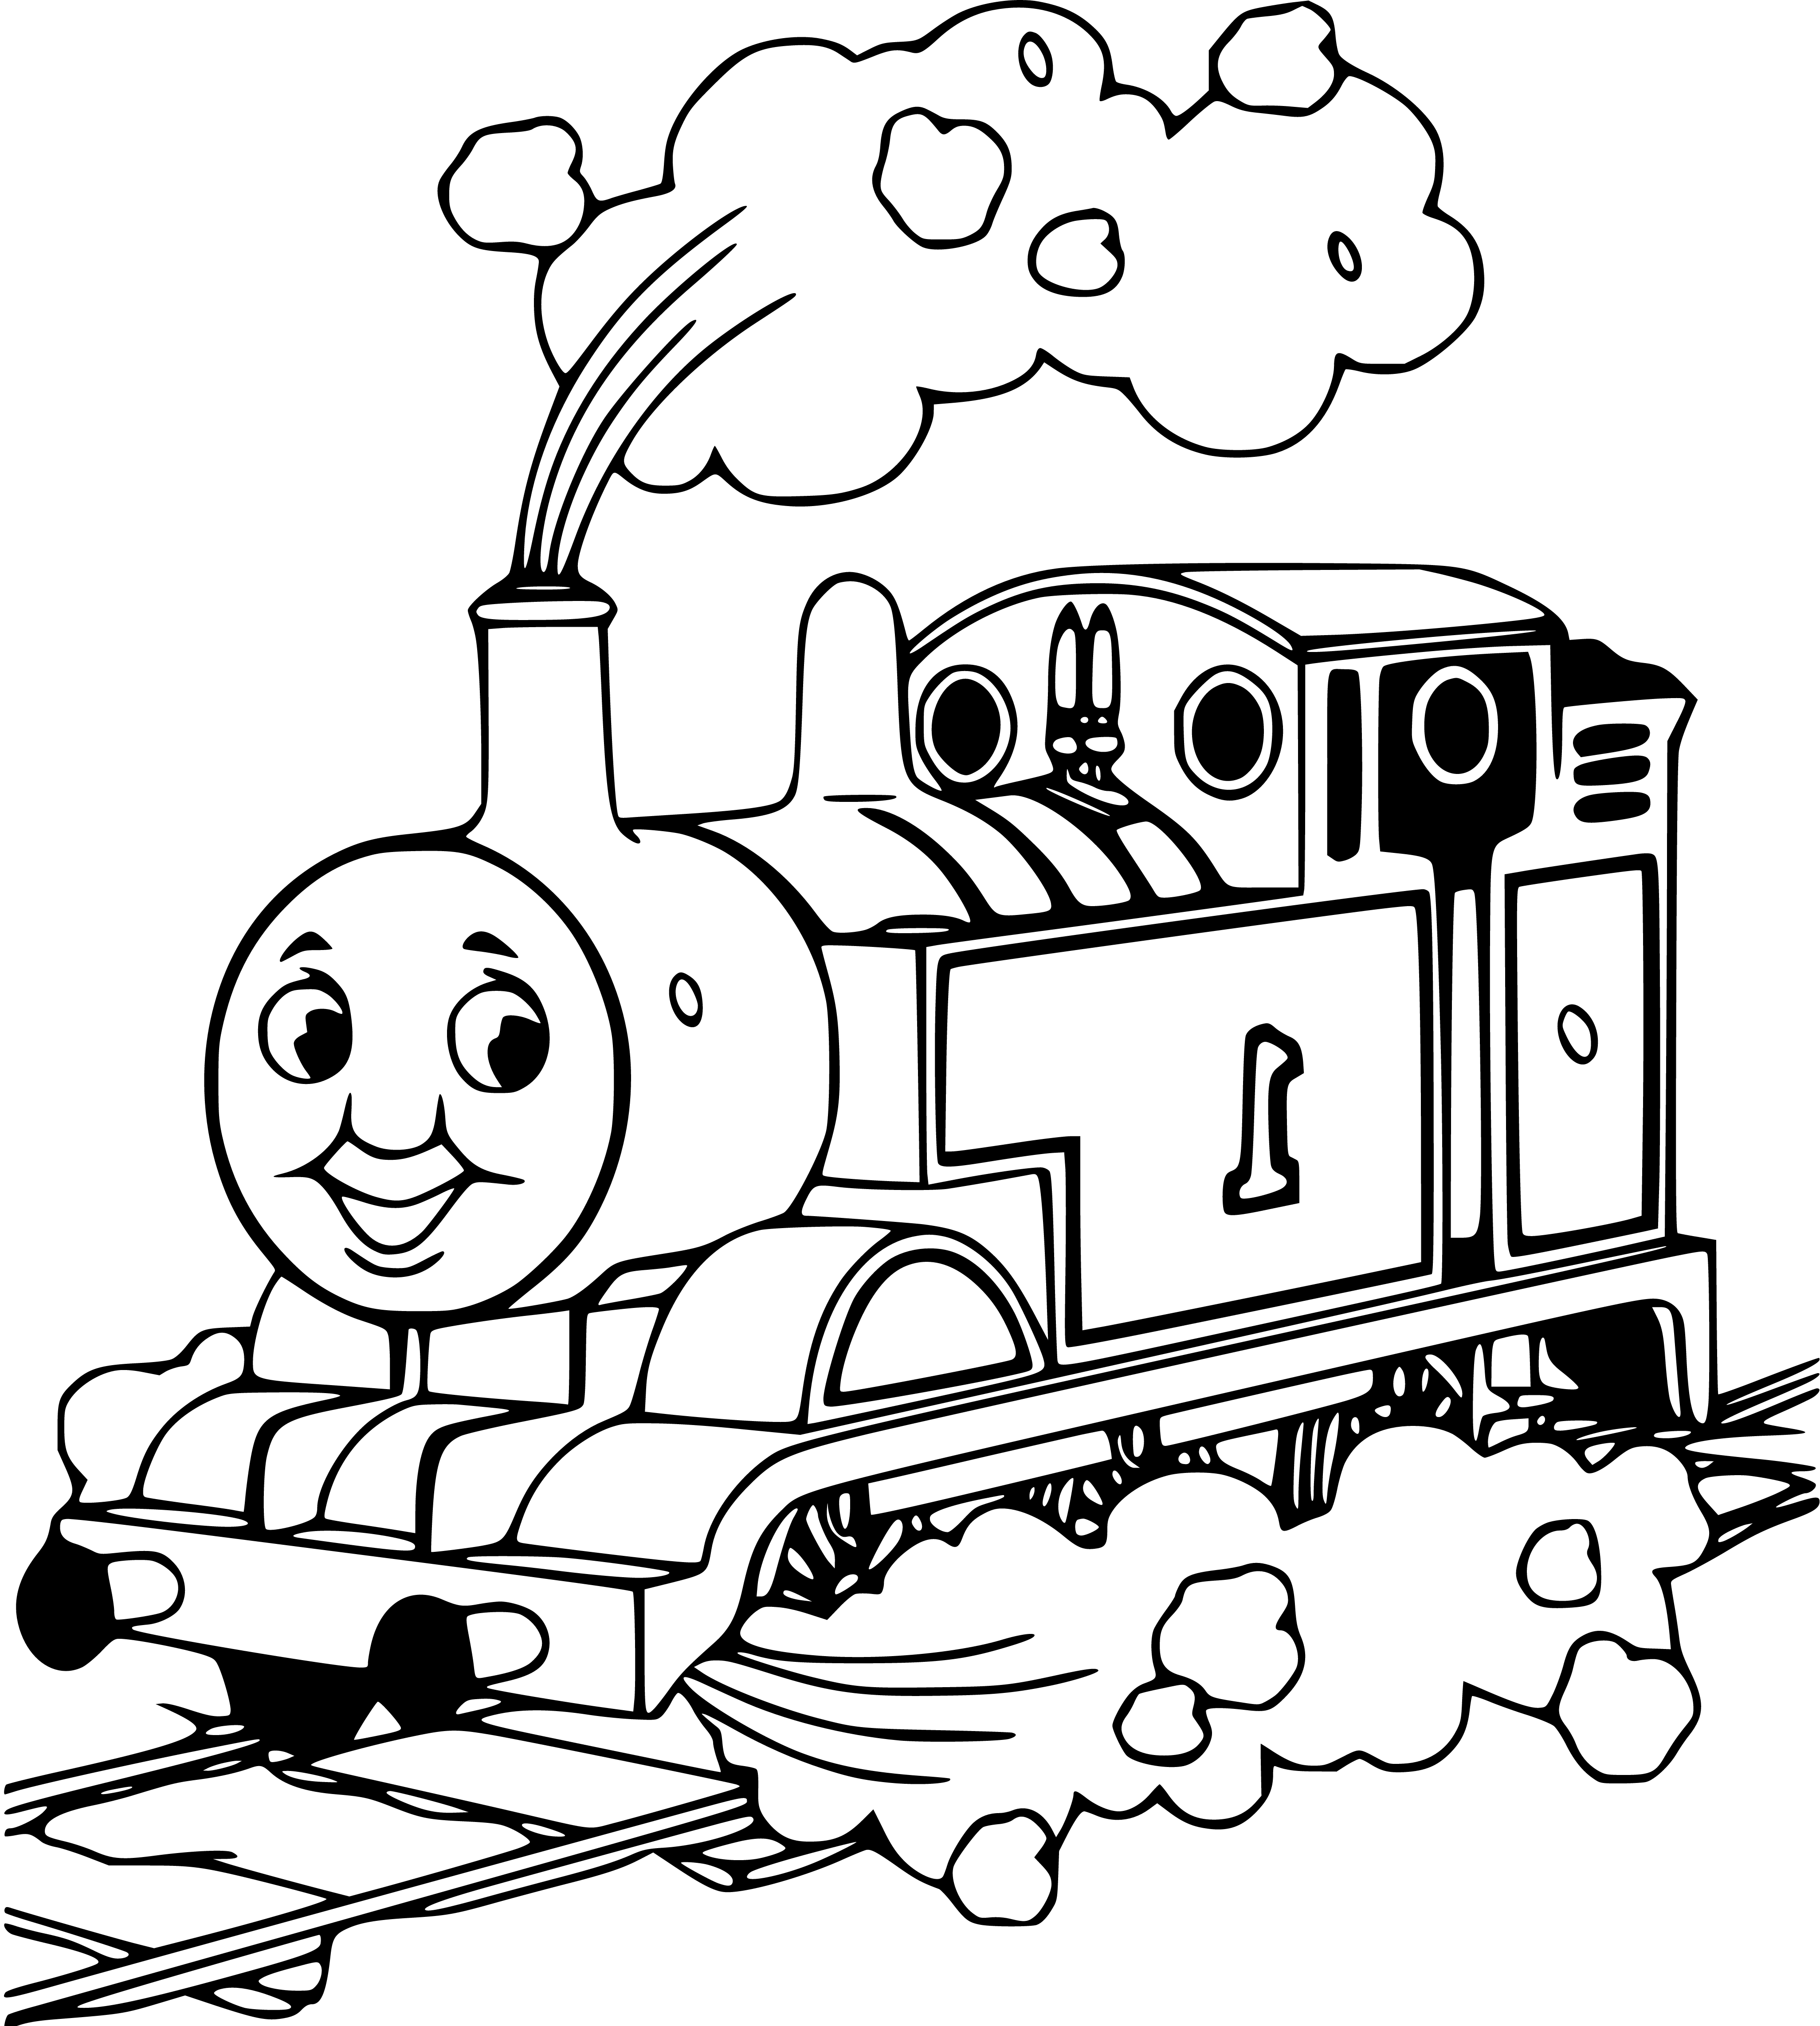 Thomas the Tank Engine Coloring Pages for Kids - SheetalColor.com